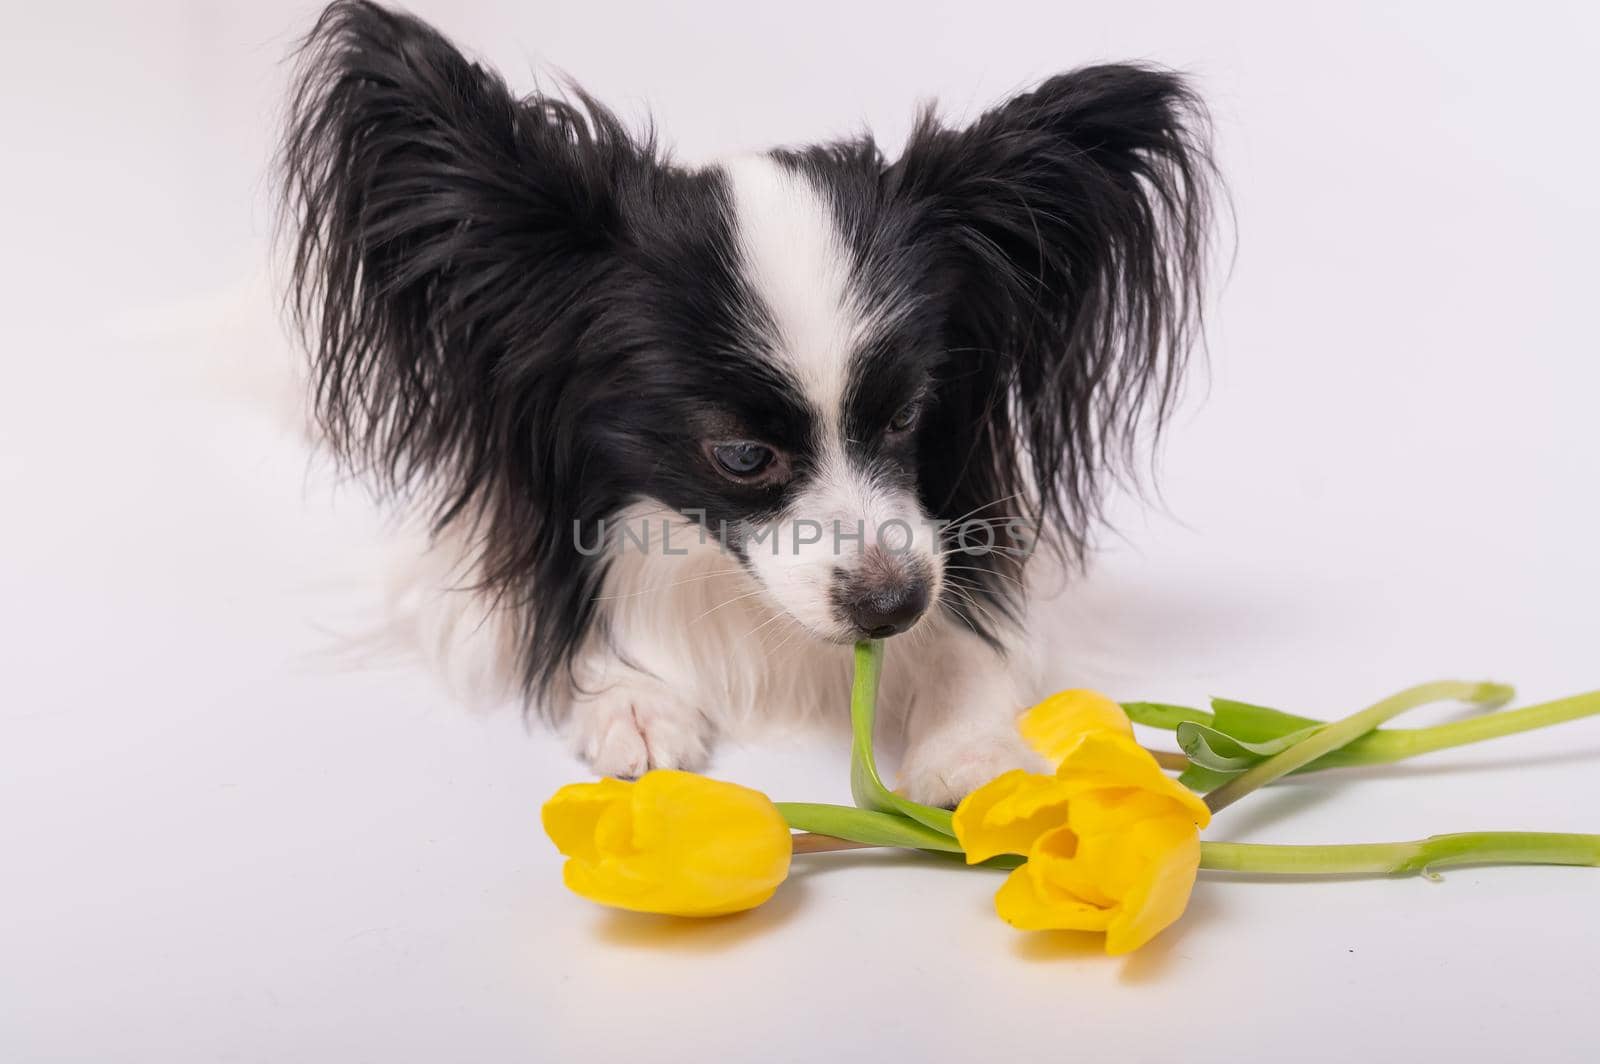 Funny dog with big shaggy black ears with a bouquet of yellow tulips on a white background by mrwed54